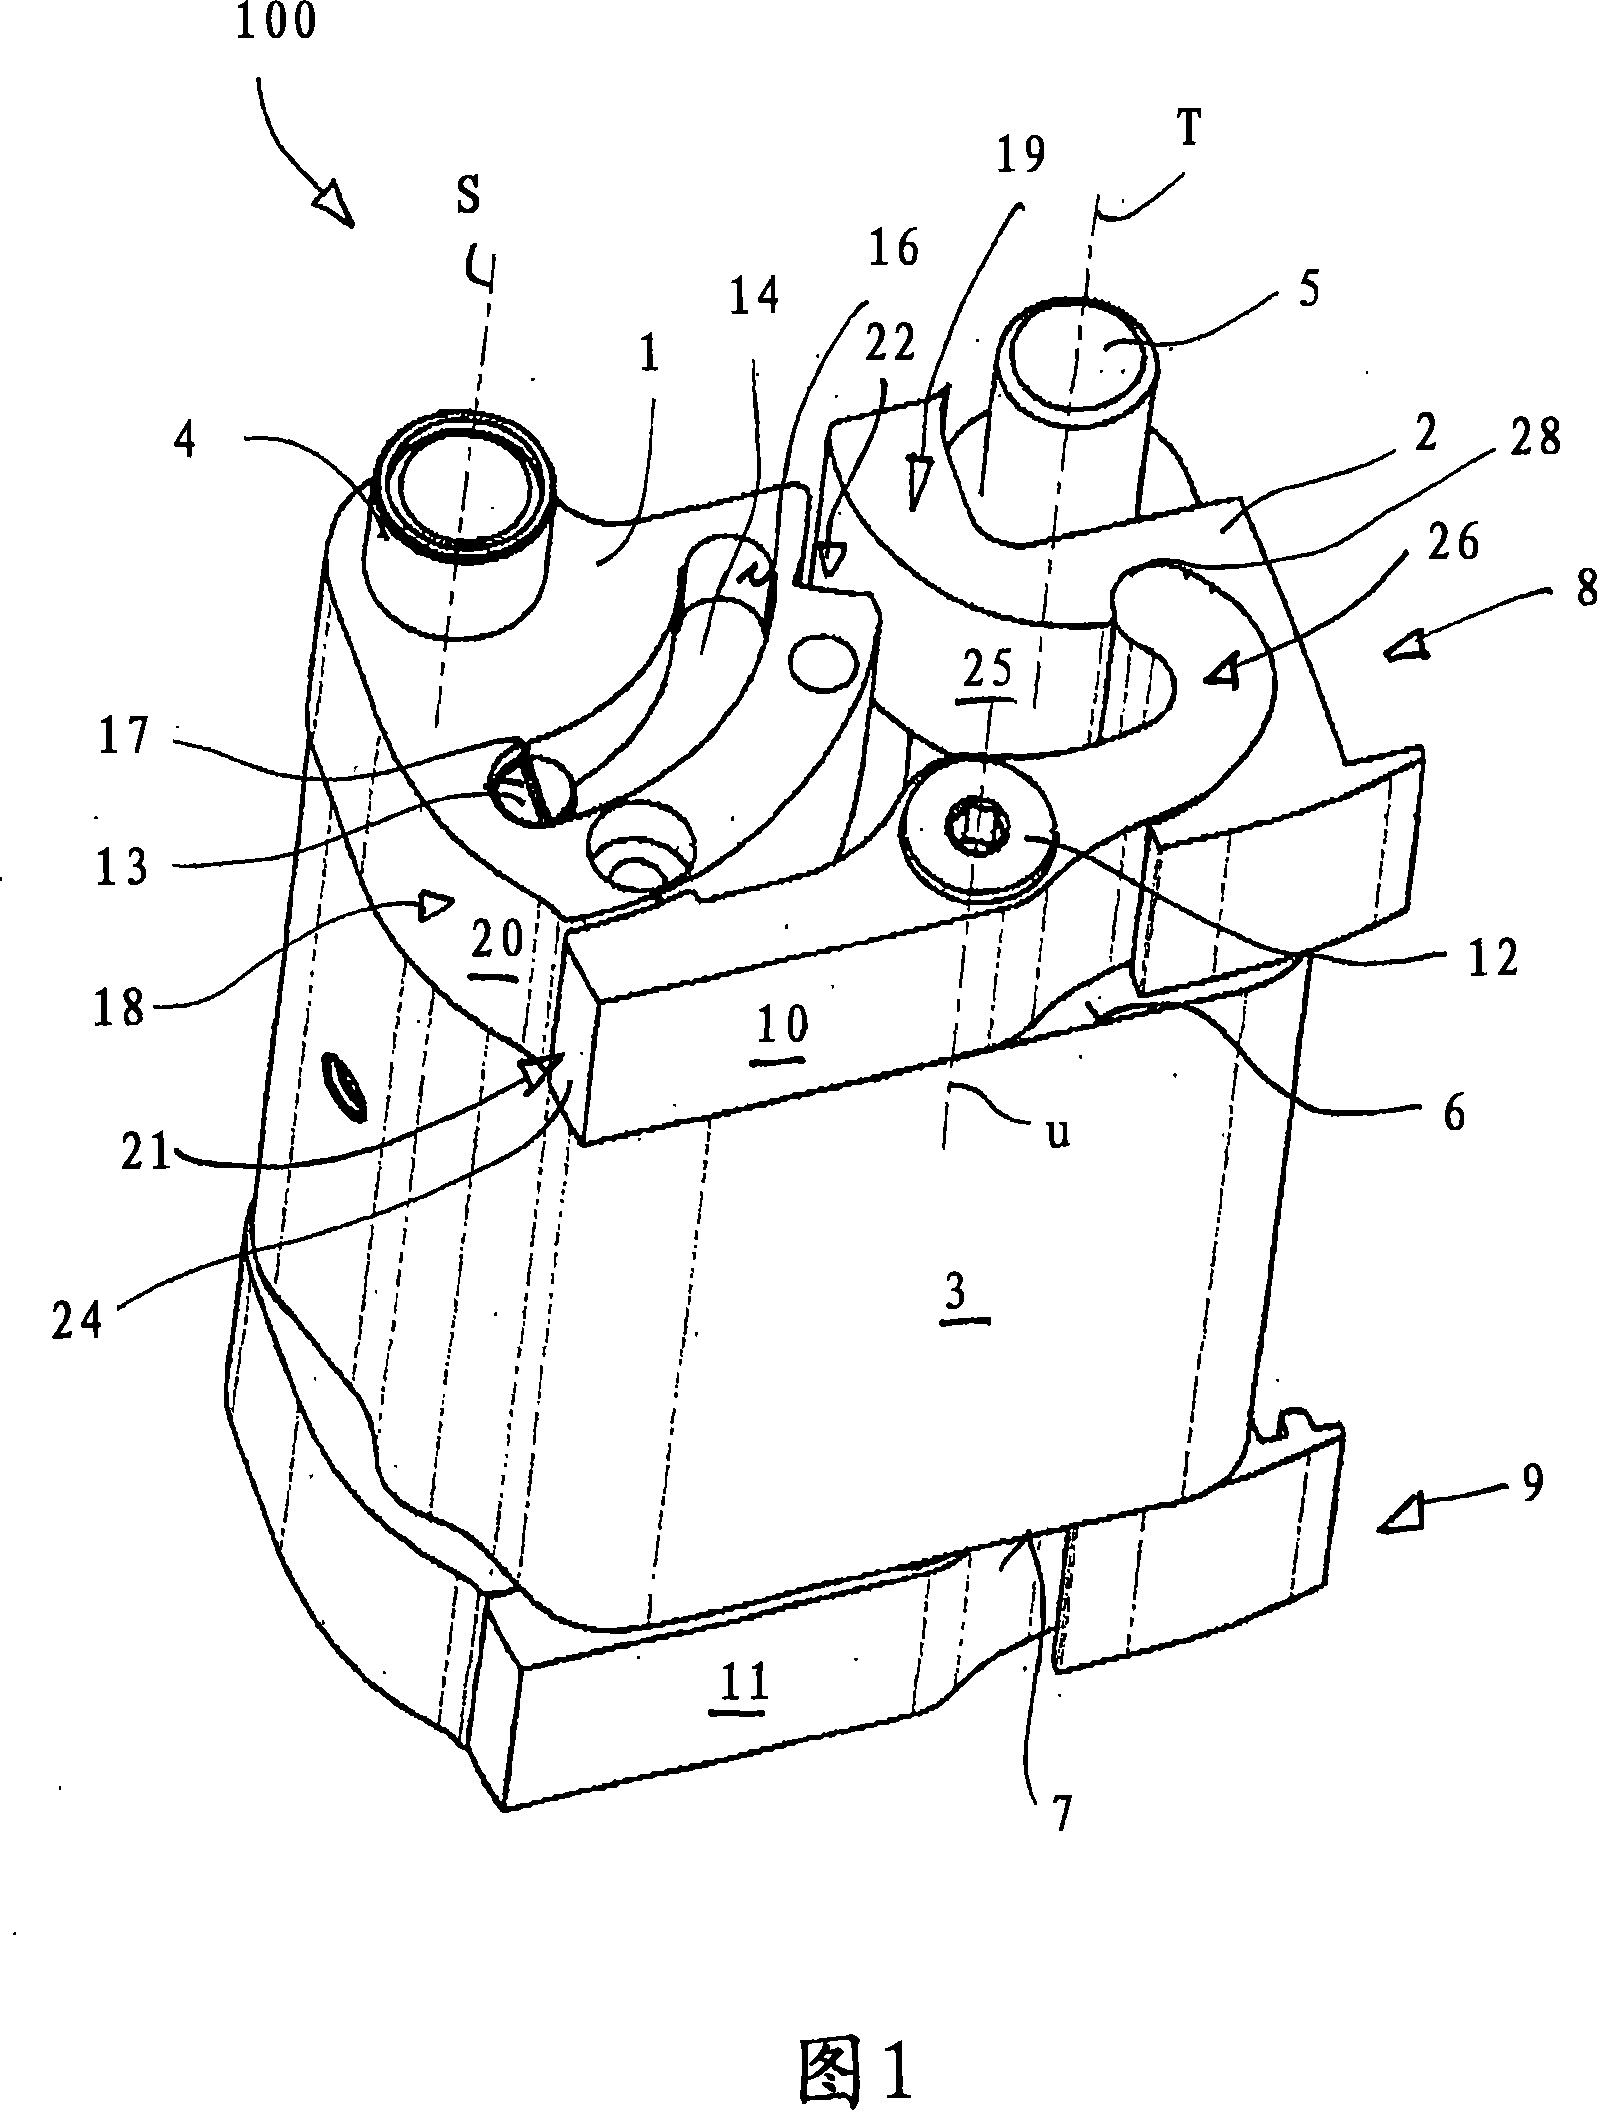 Forced controlling hinge of hiding type device between side frame and wing fan